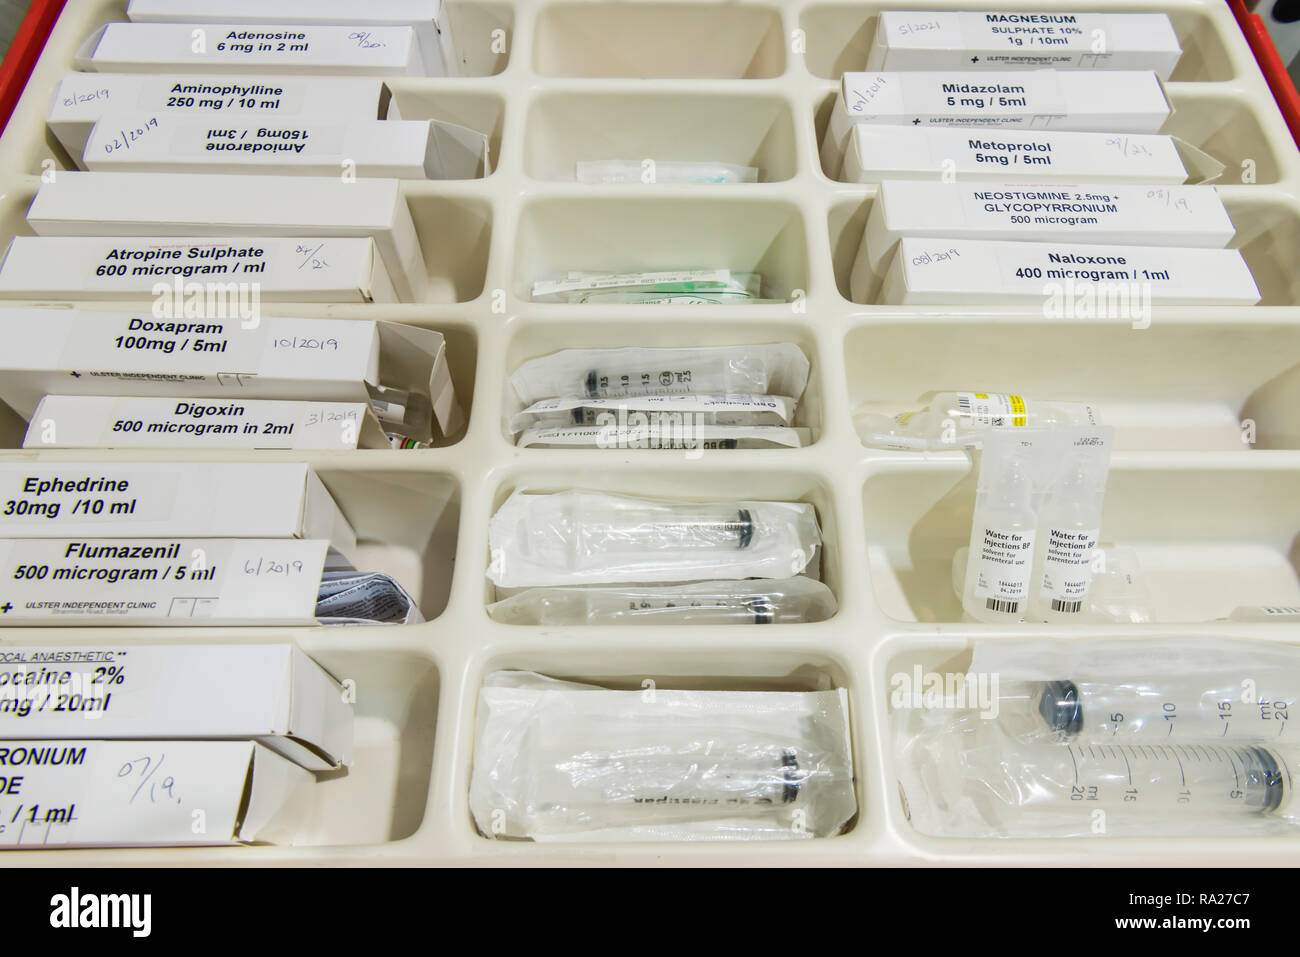 Drawer in a hospital crash trolley for emergency resuscitation containing drugs. Stock Photo